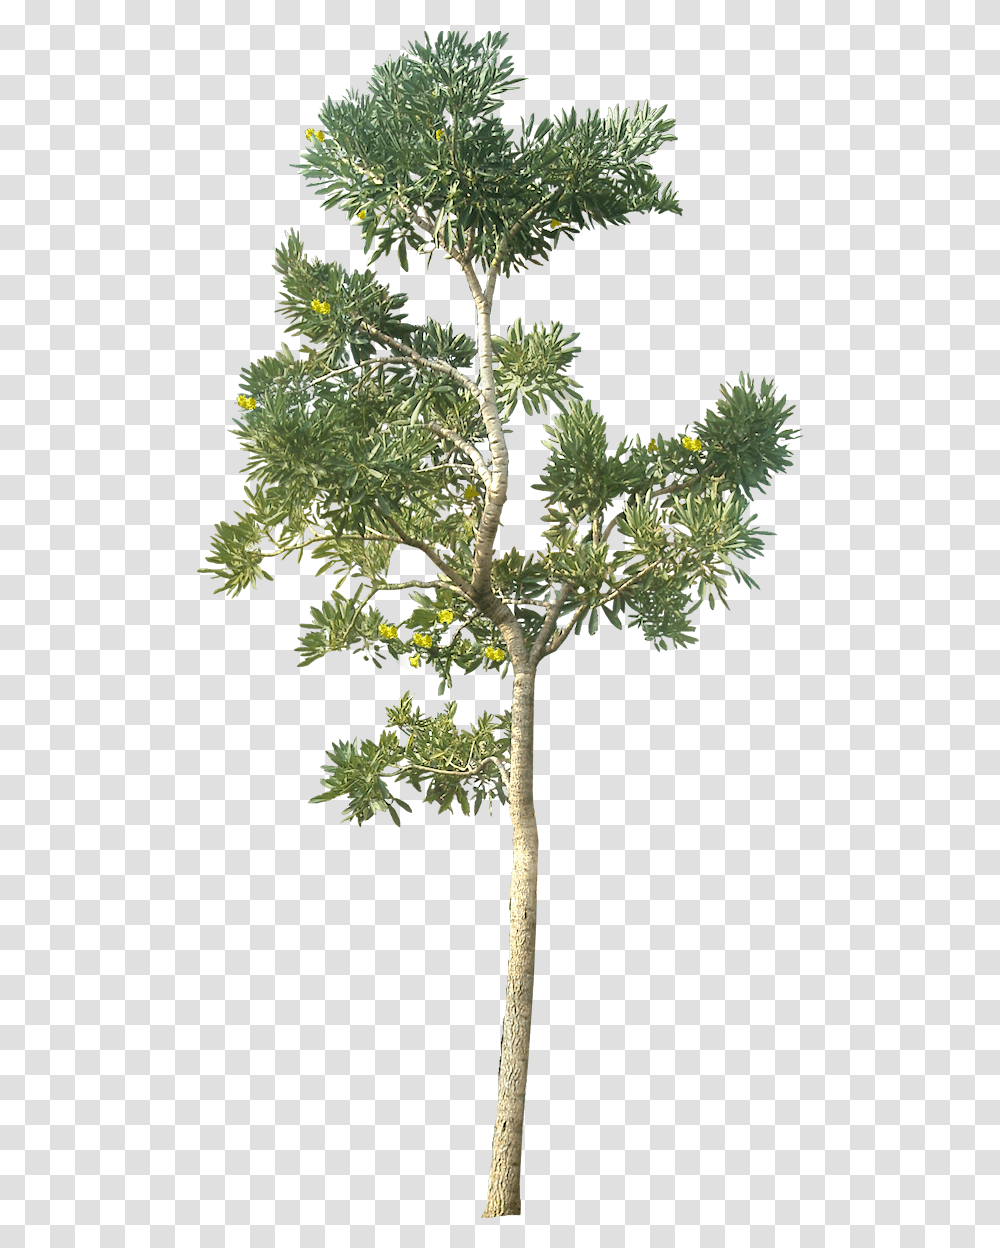 Small Trees Architecture Tree, Plant, Potted Plant, Vase, Jar Transparent Png